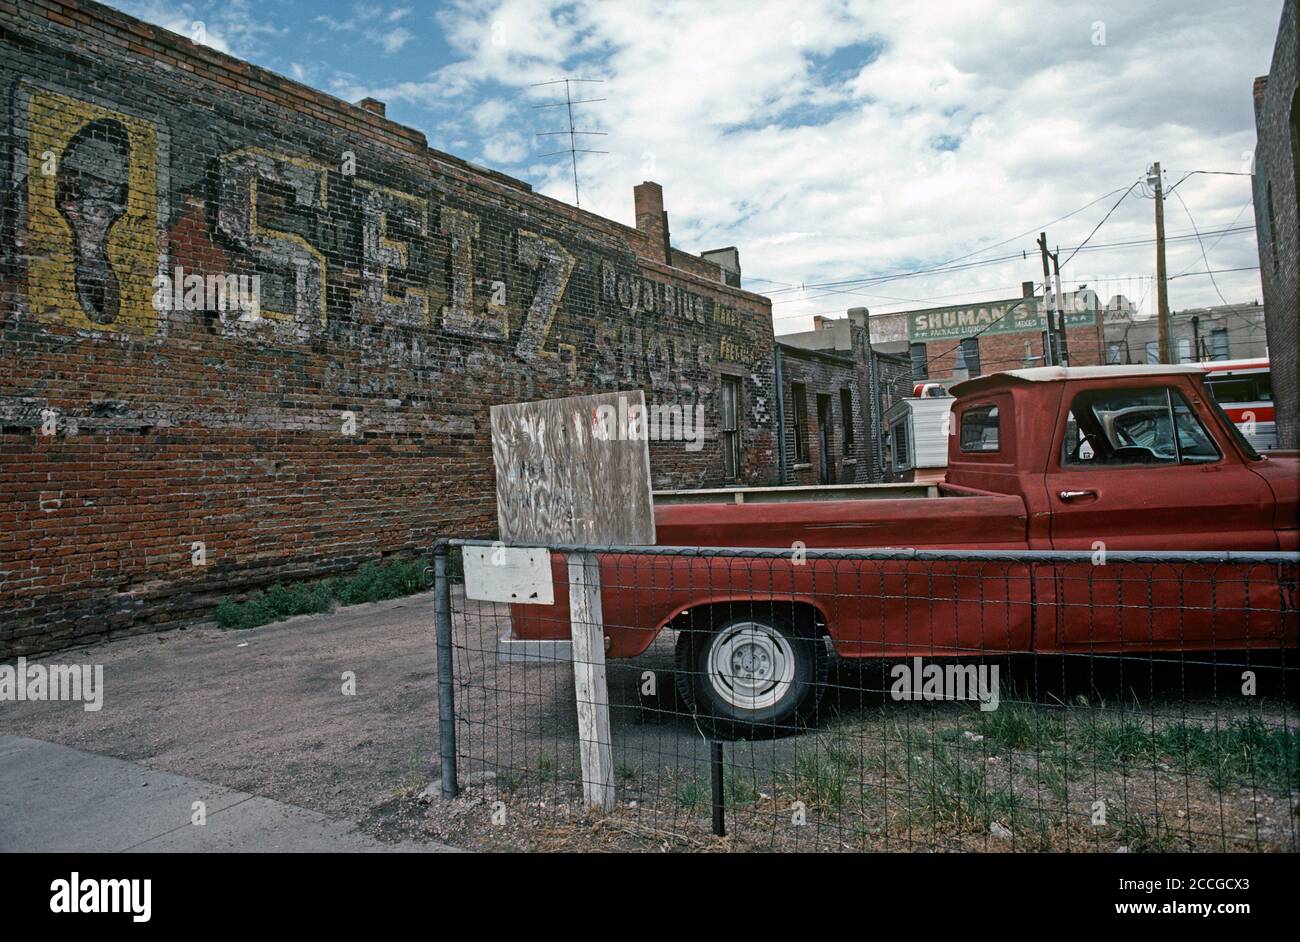 PARKING LOT WITH OLD PAINTED ADVERTISING SIGN IN DOWNTOWN CHEYENNE, WYOMING, USA 1970s Stock Photo